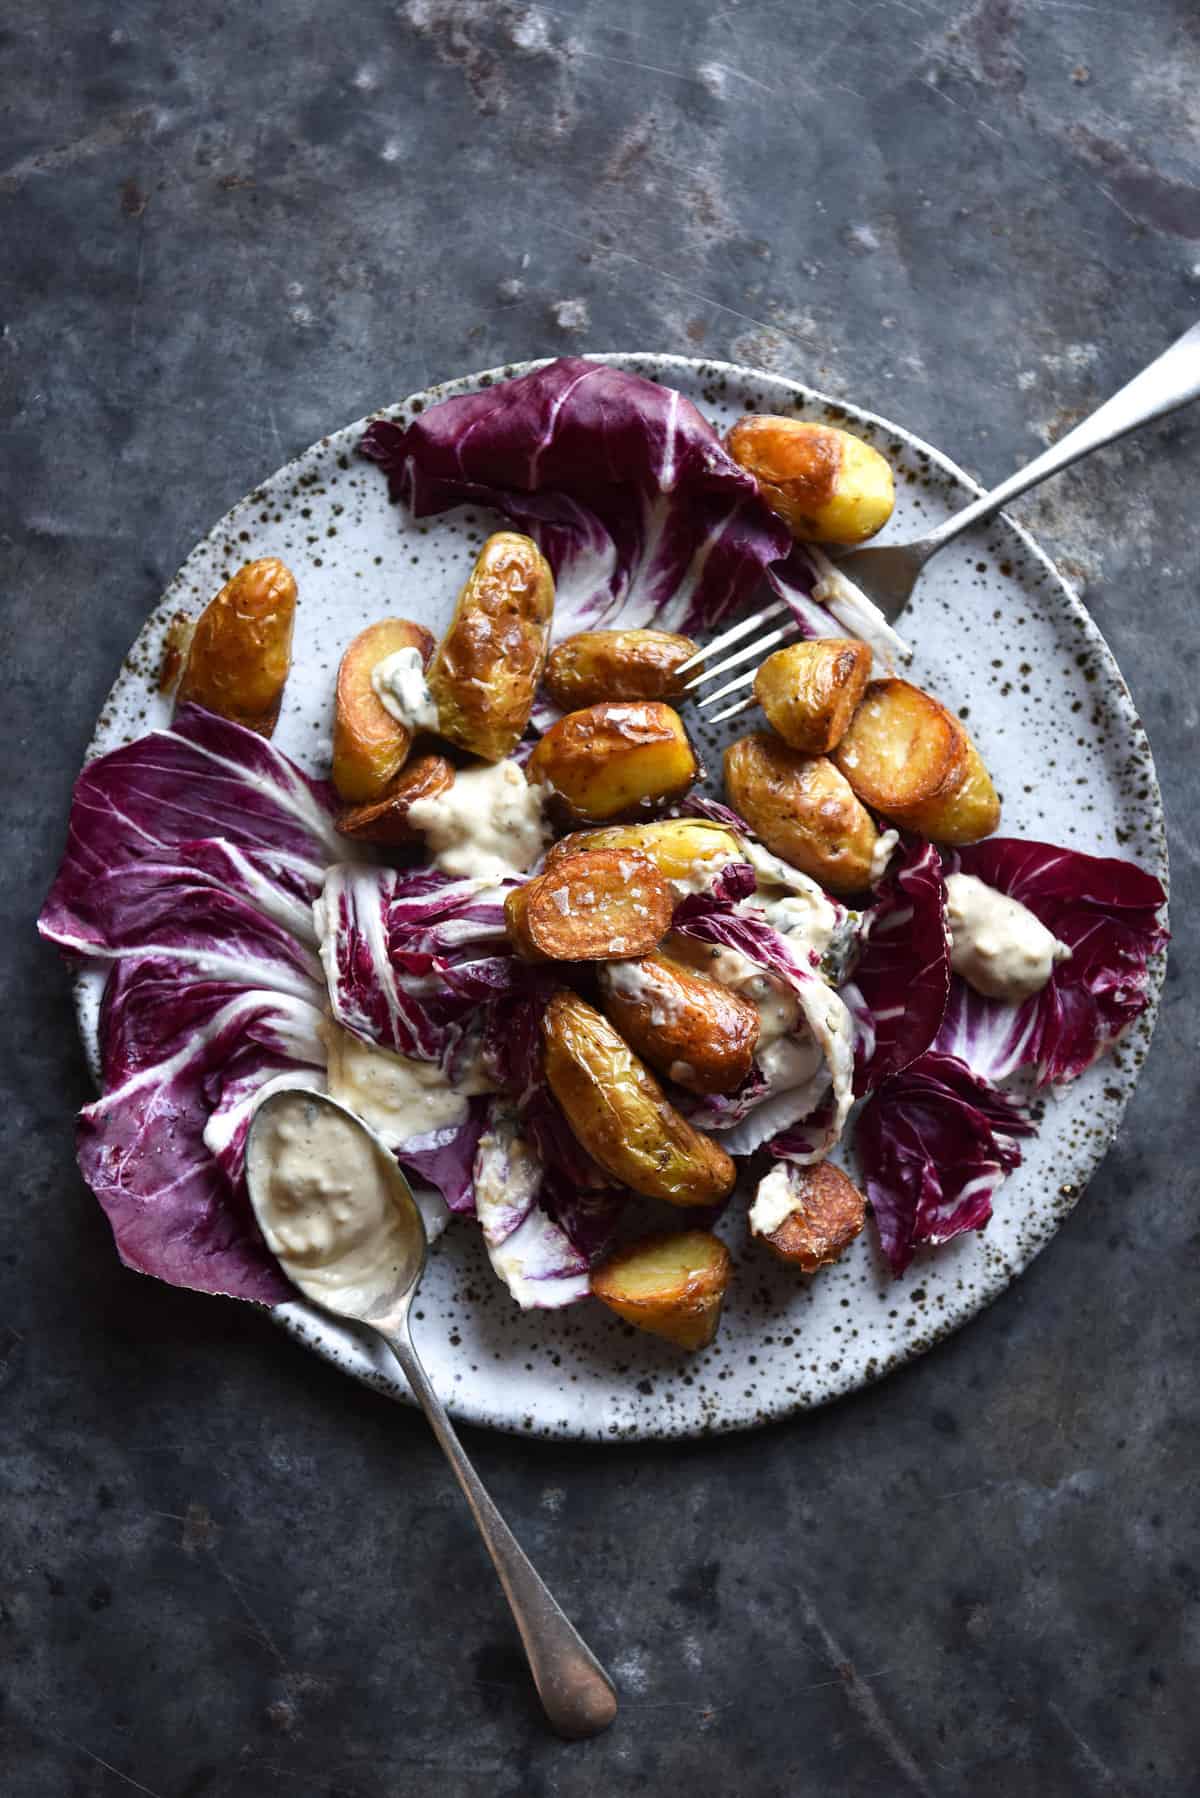 An aerial image of a plate of radicchio, potatoes and salad on a mottled dark blue steel backdrop.